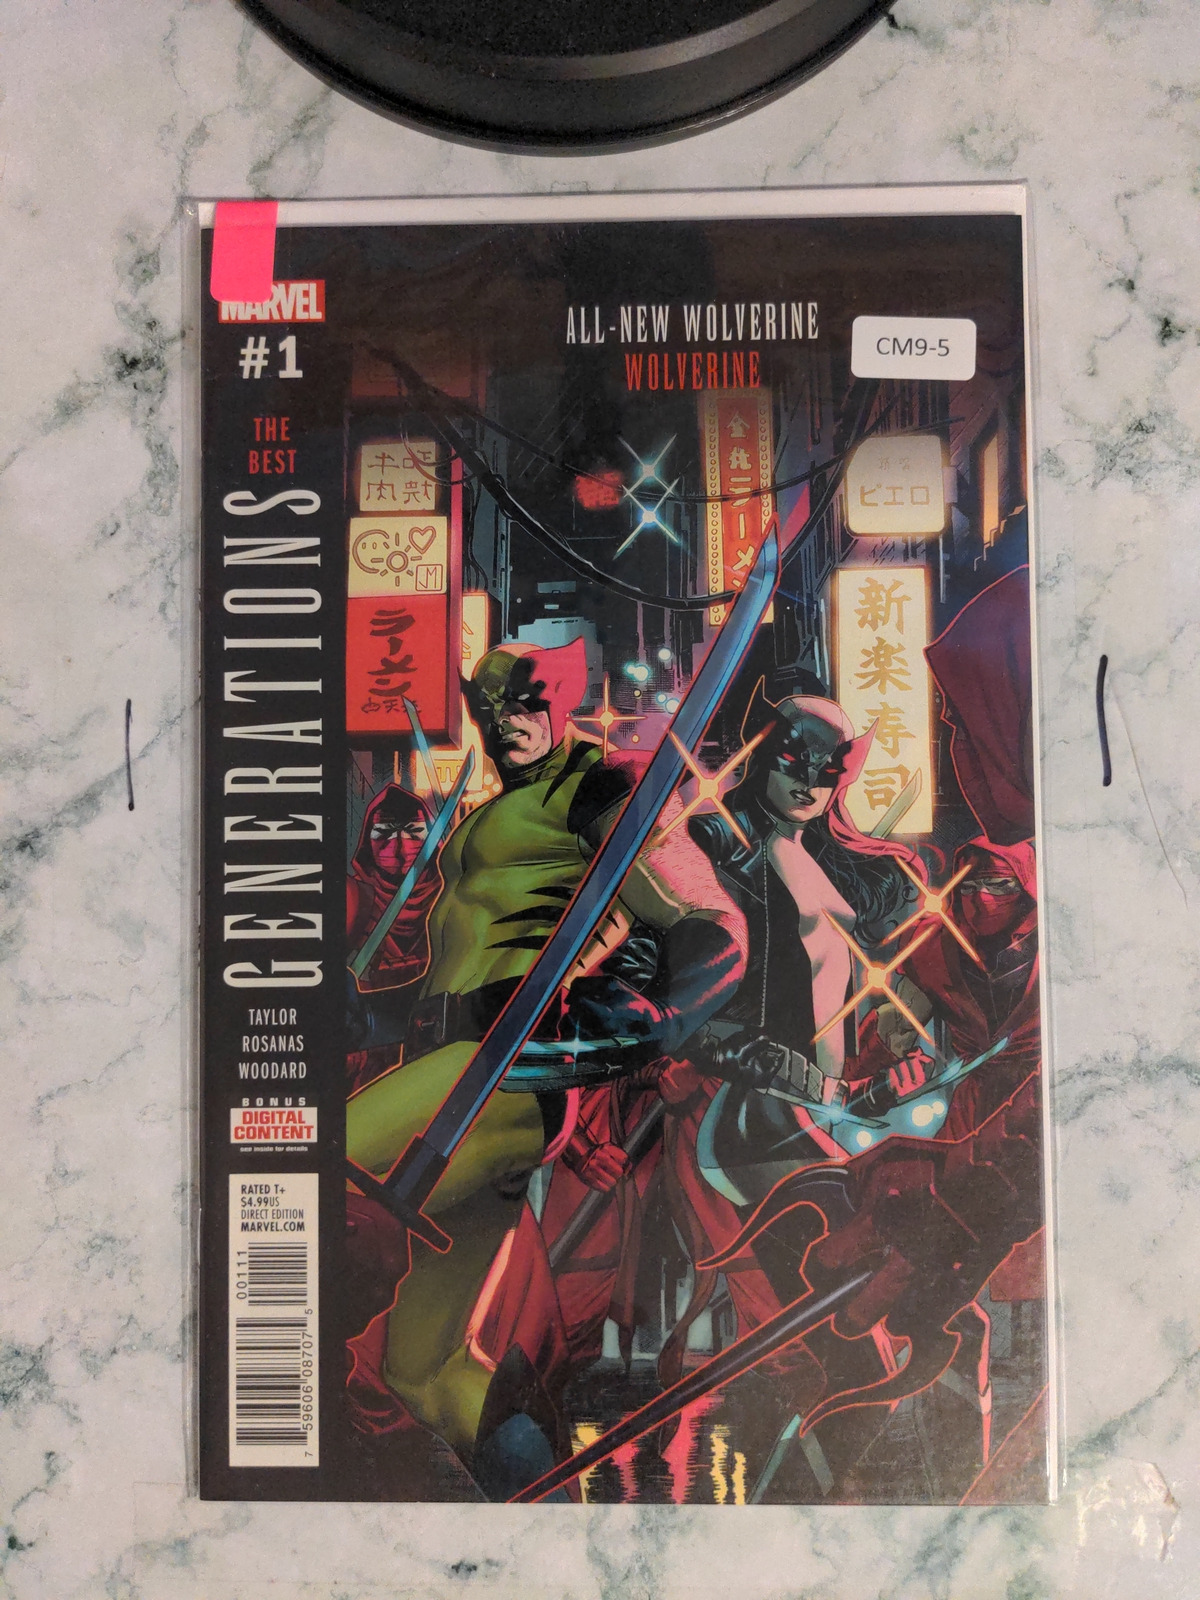 GENERATIONS: WOLVERINE & ALL-NEW WOLVERINE #1 ONE-SHOT 9.4 MARVEL COMIC CM9-5